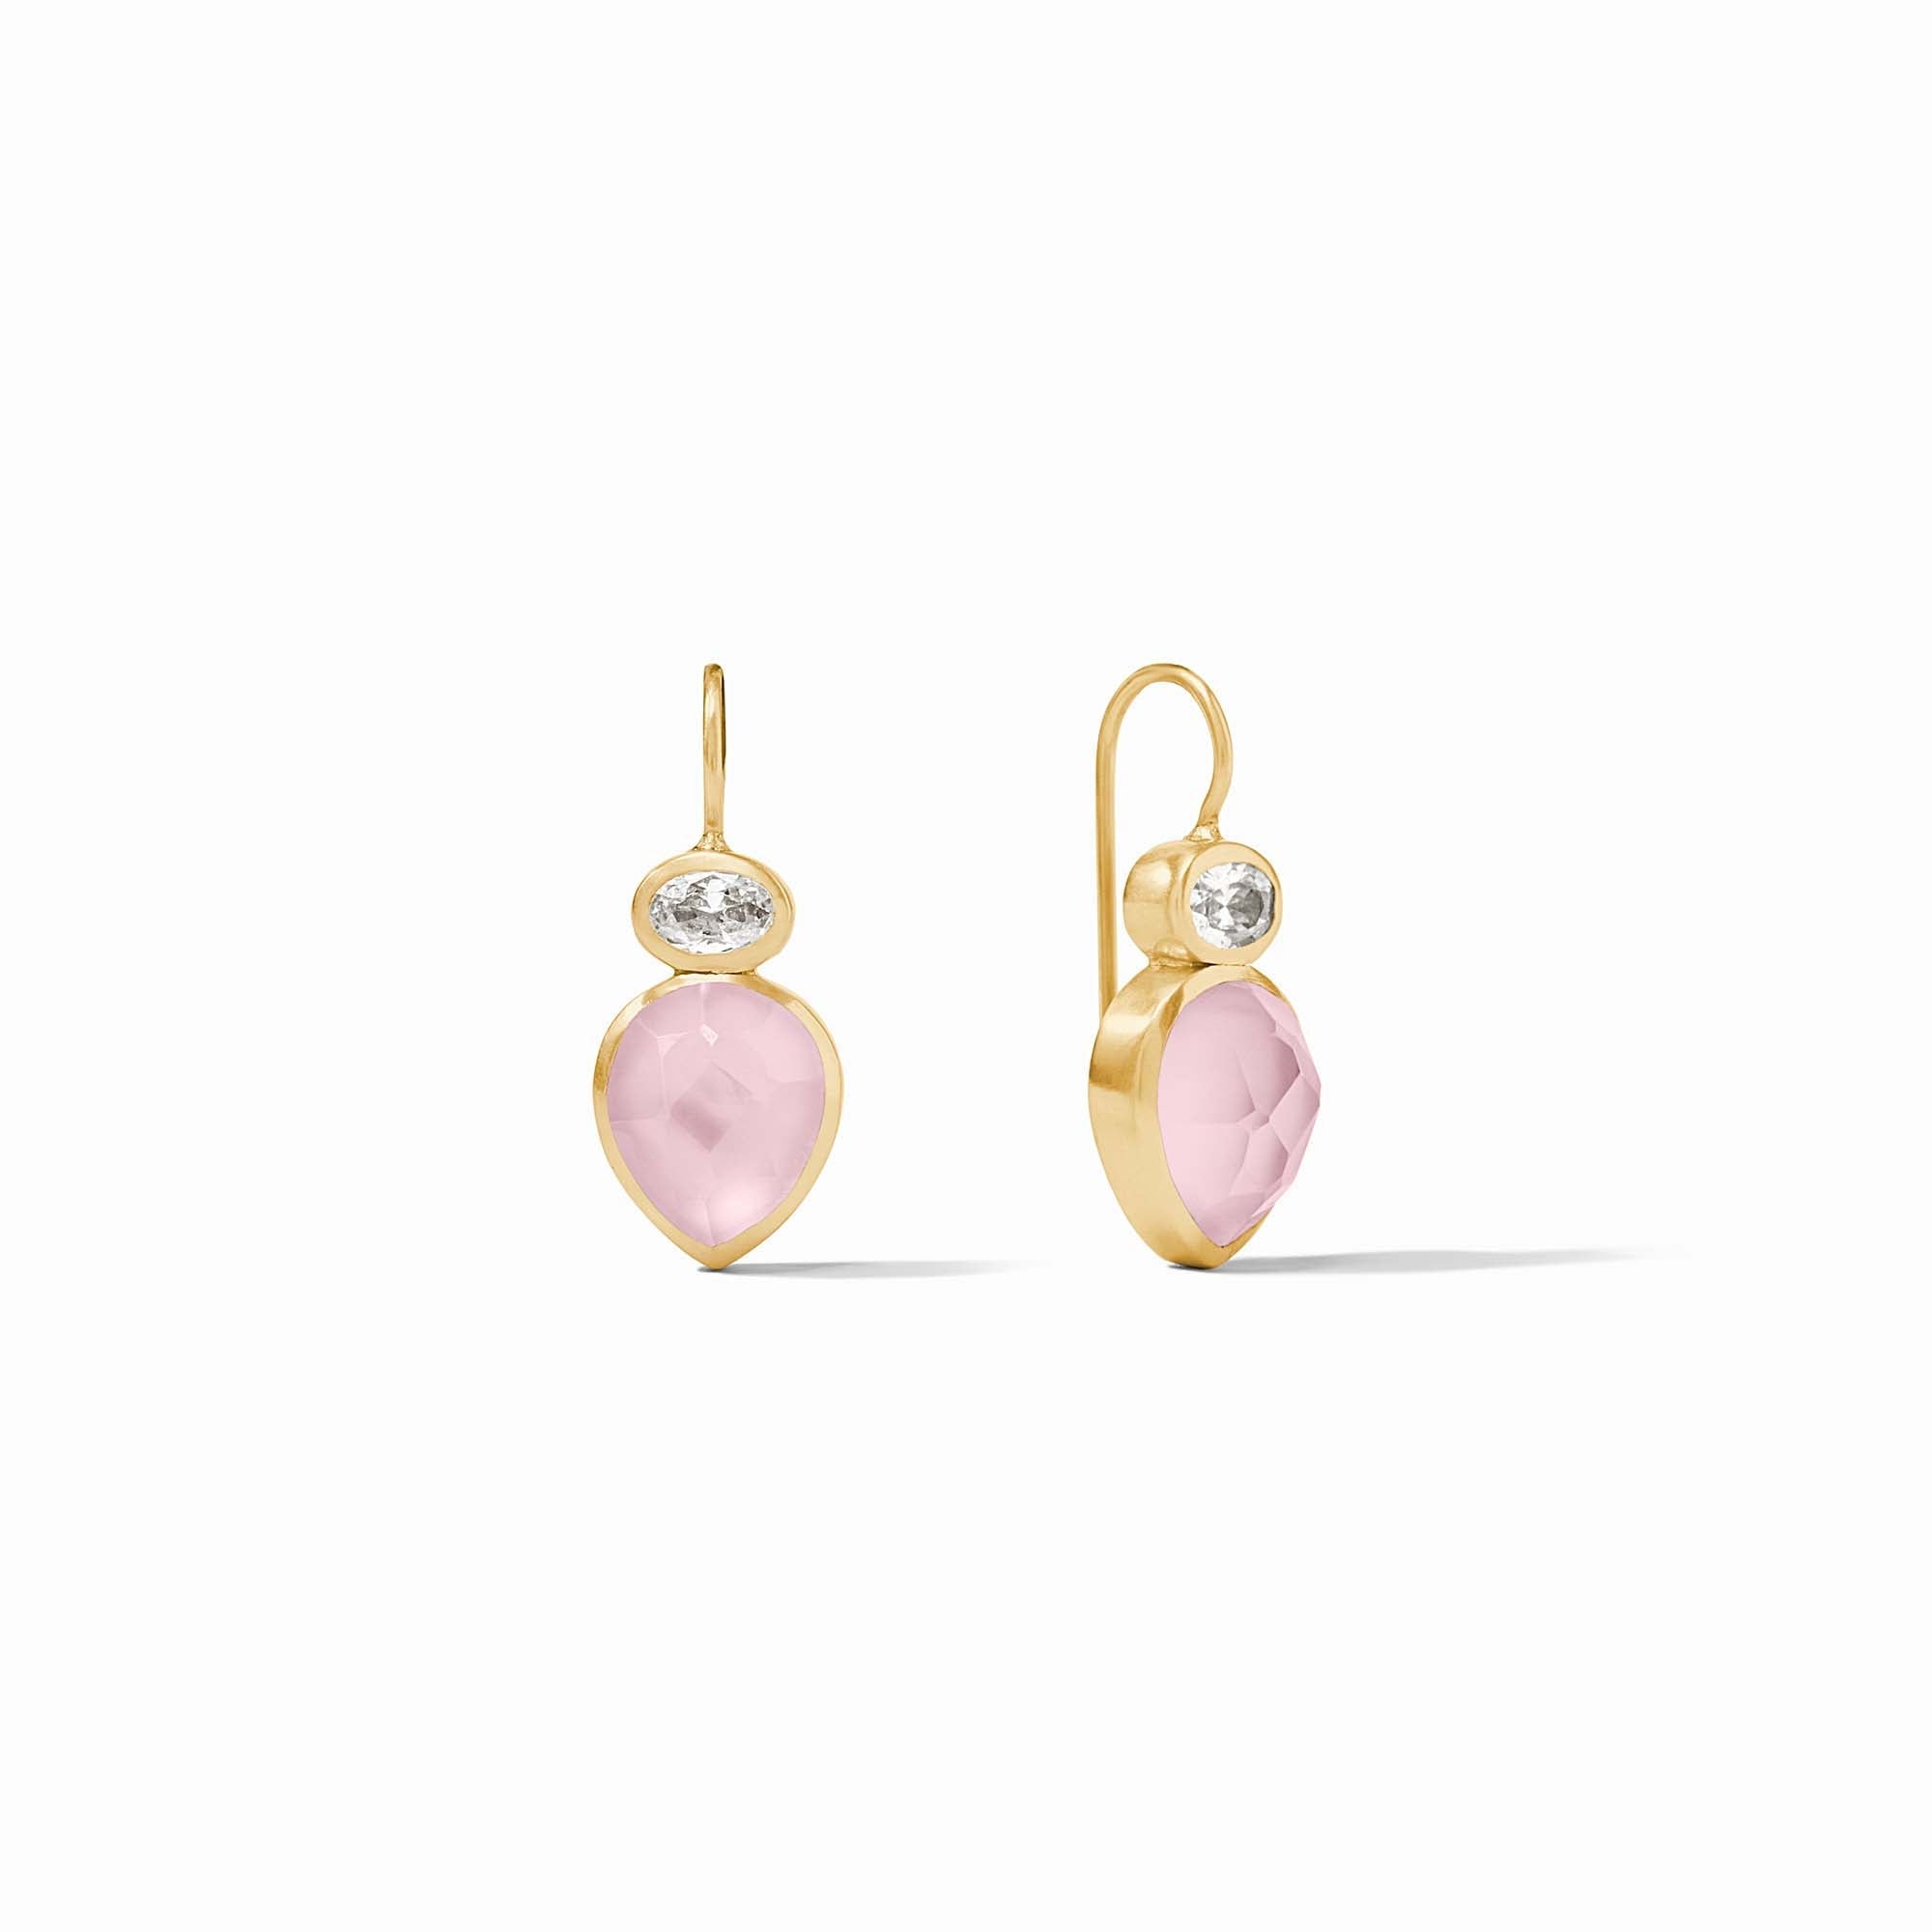 Julie Vos - Clementine Earring, Iridescent Rose